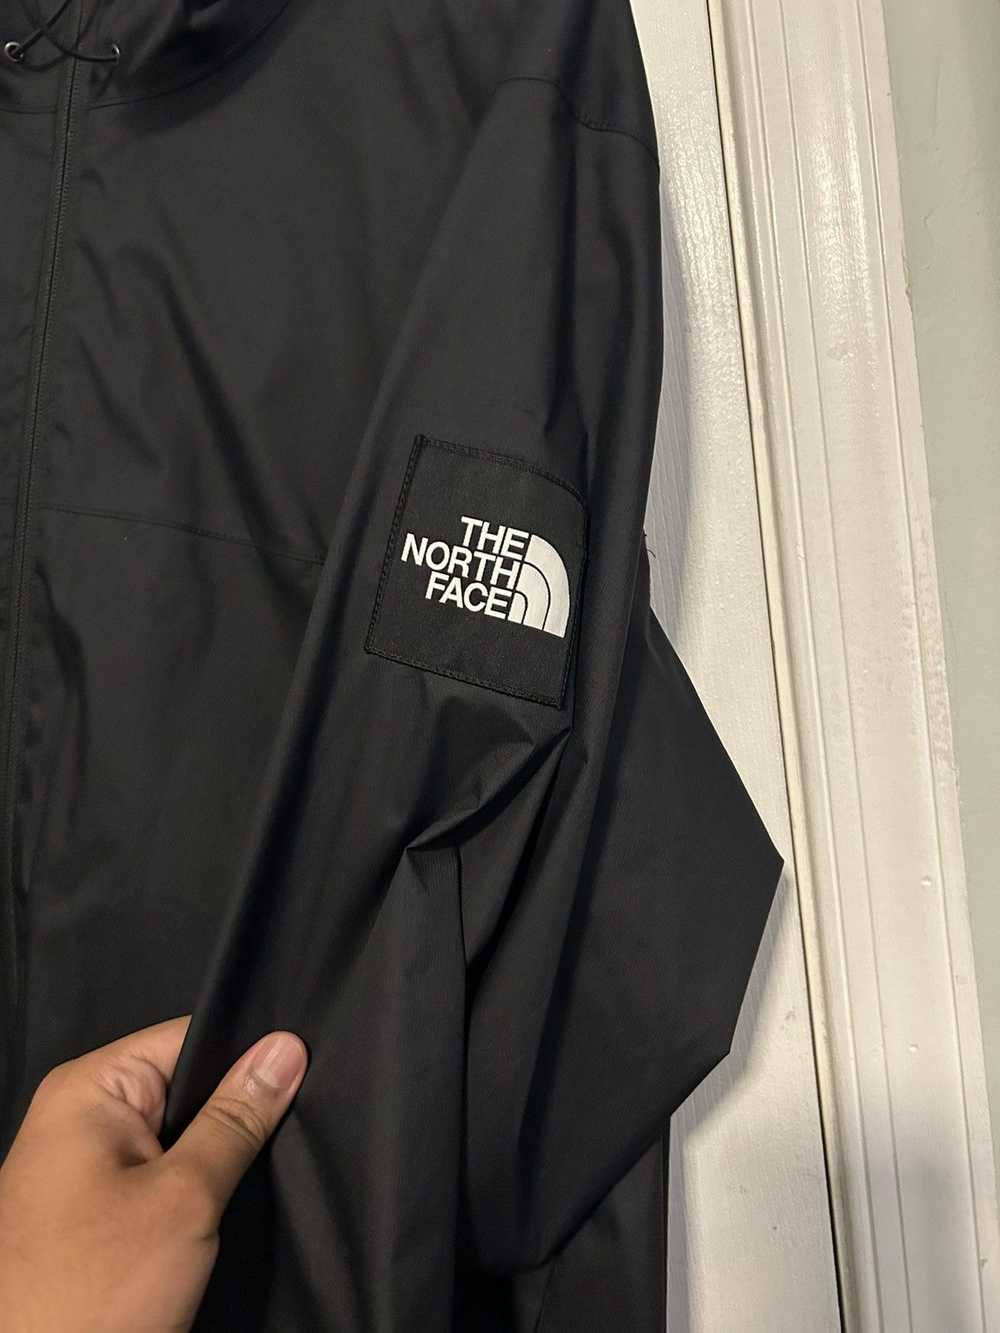 The North Face North Face Windbreaker - image 4